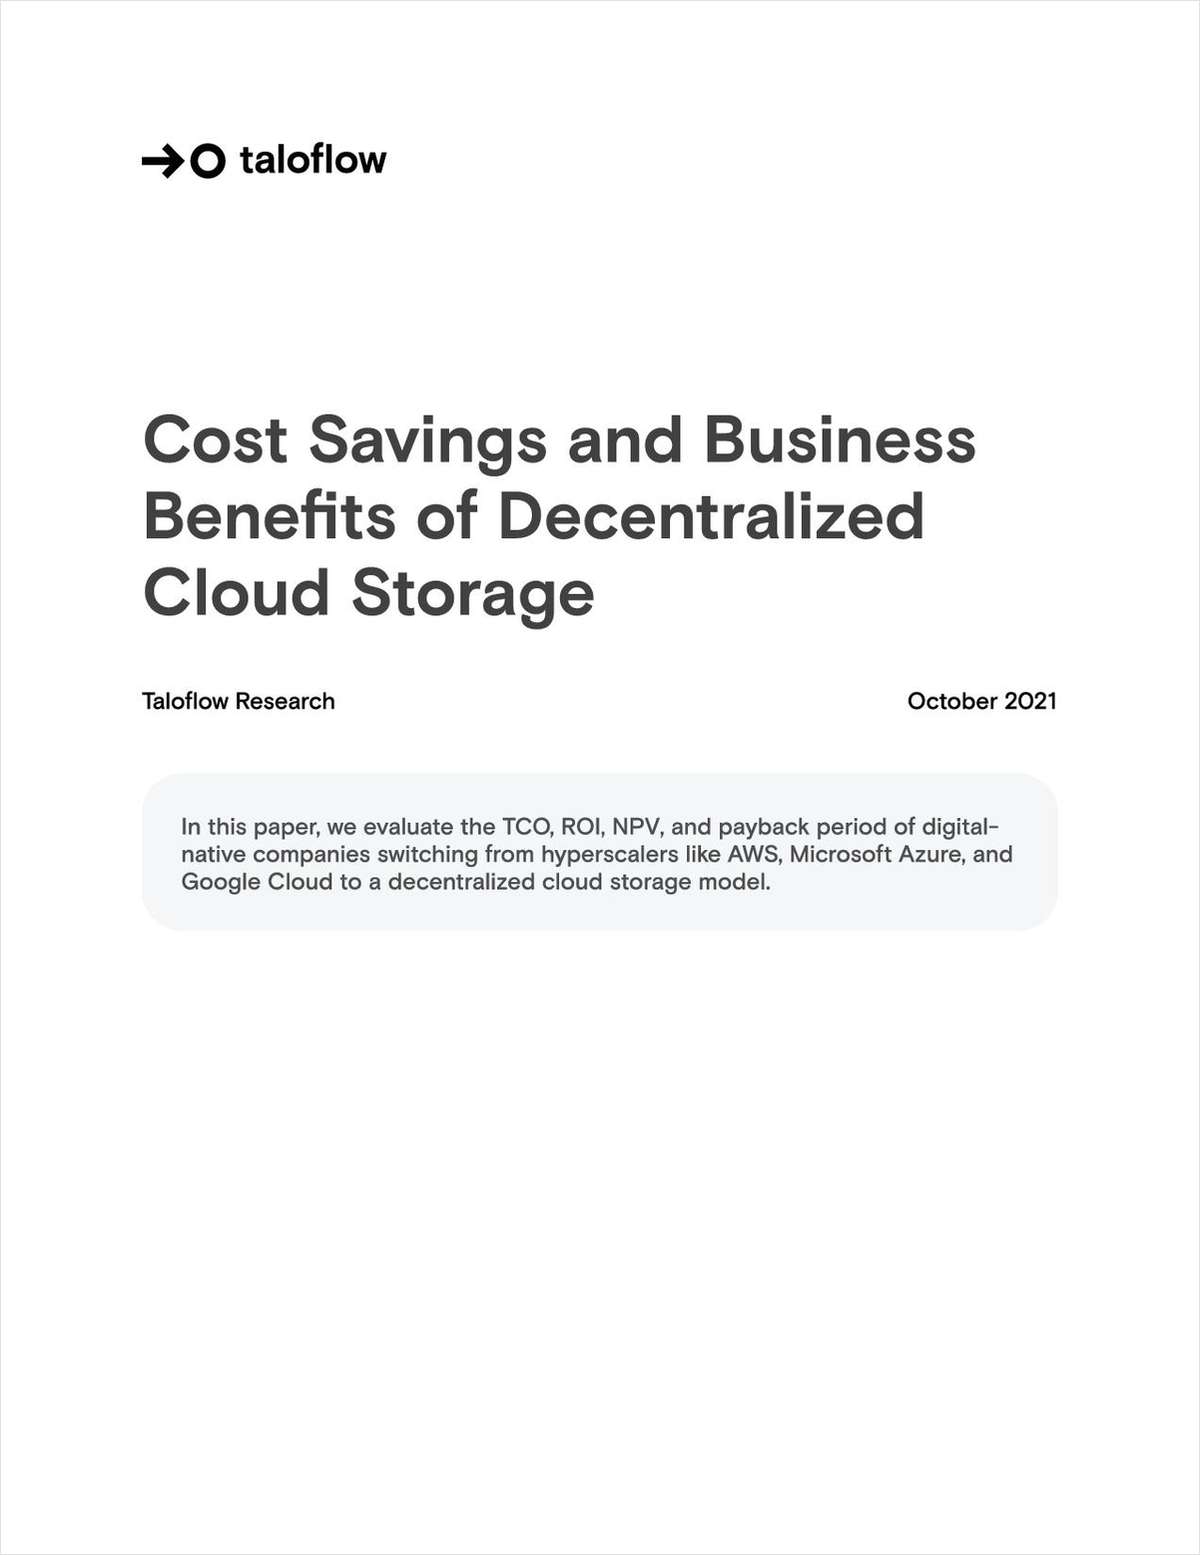 The Cost Savings & Business Benefits of Decentralized Cloud Storage